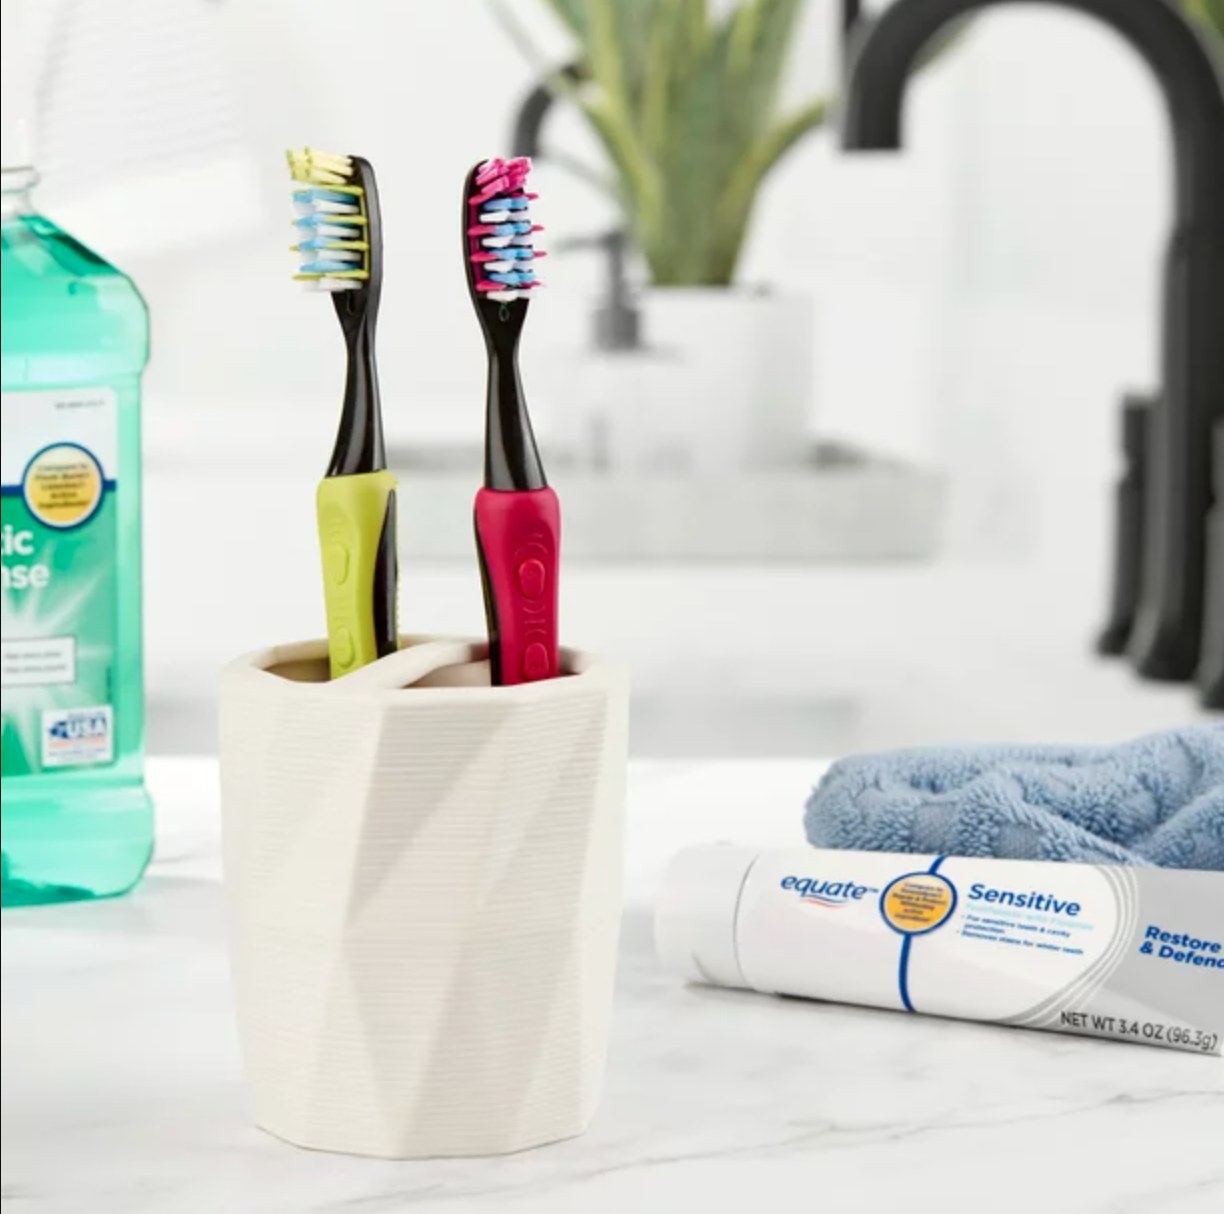 the green and pink electric toothbrushes in a cup on a counter with toothpaste and mouthwash